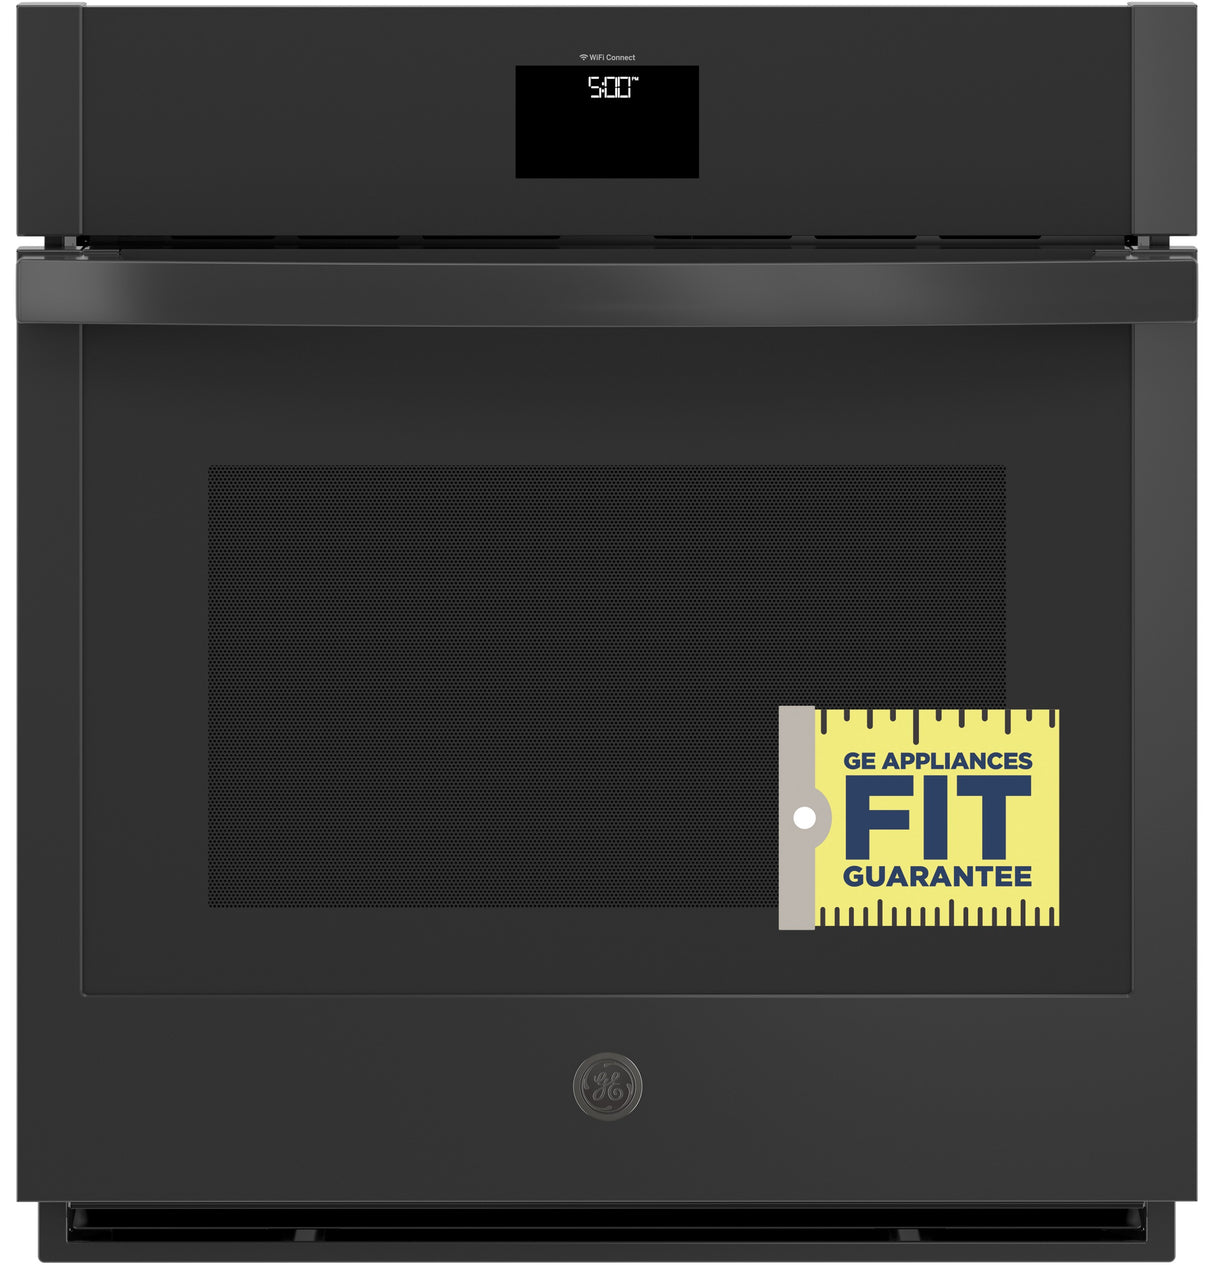 GE(R) 27" Smart Built-In Convection Single Wall Oven - (JKS5000DNBB)